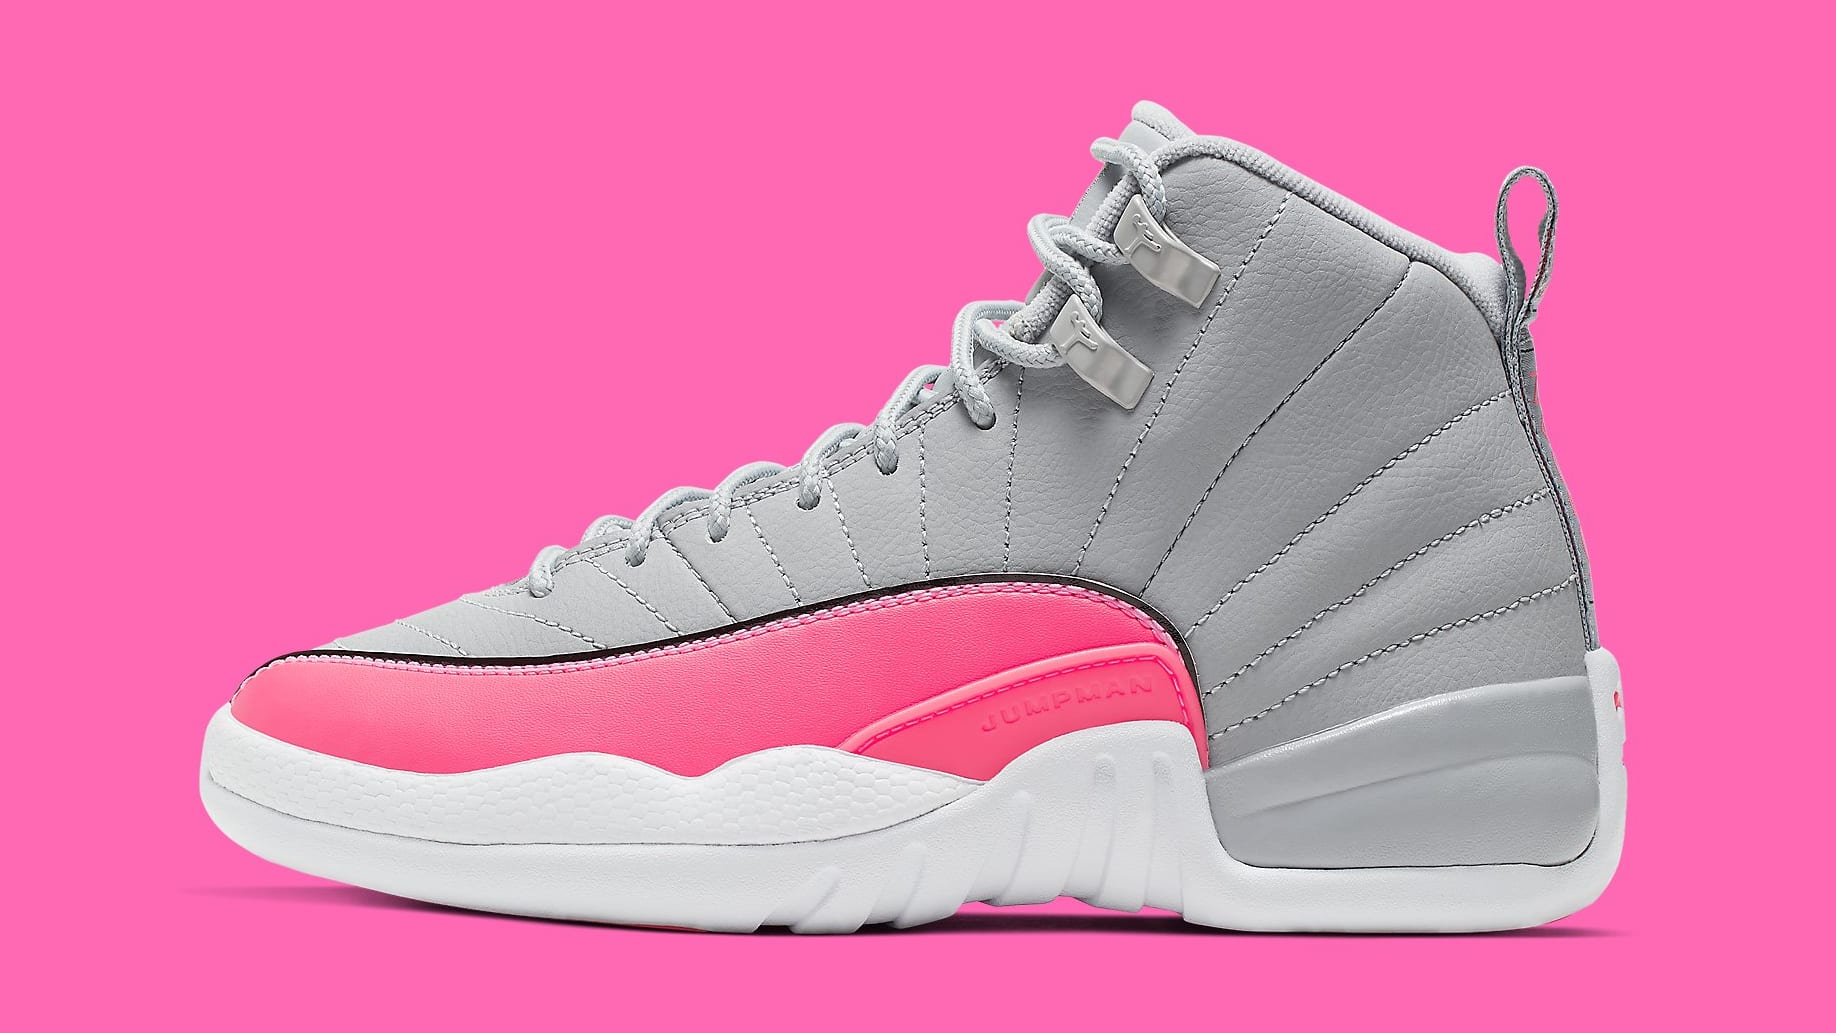 pink 12s 2019